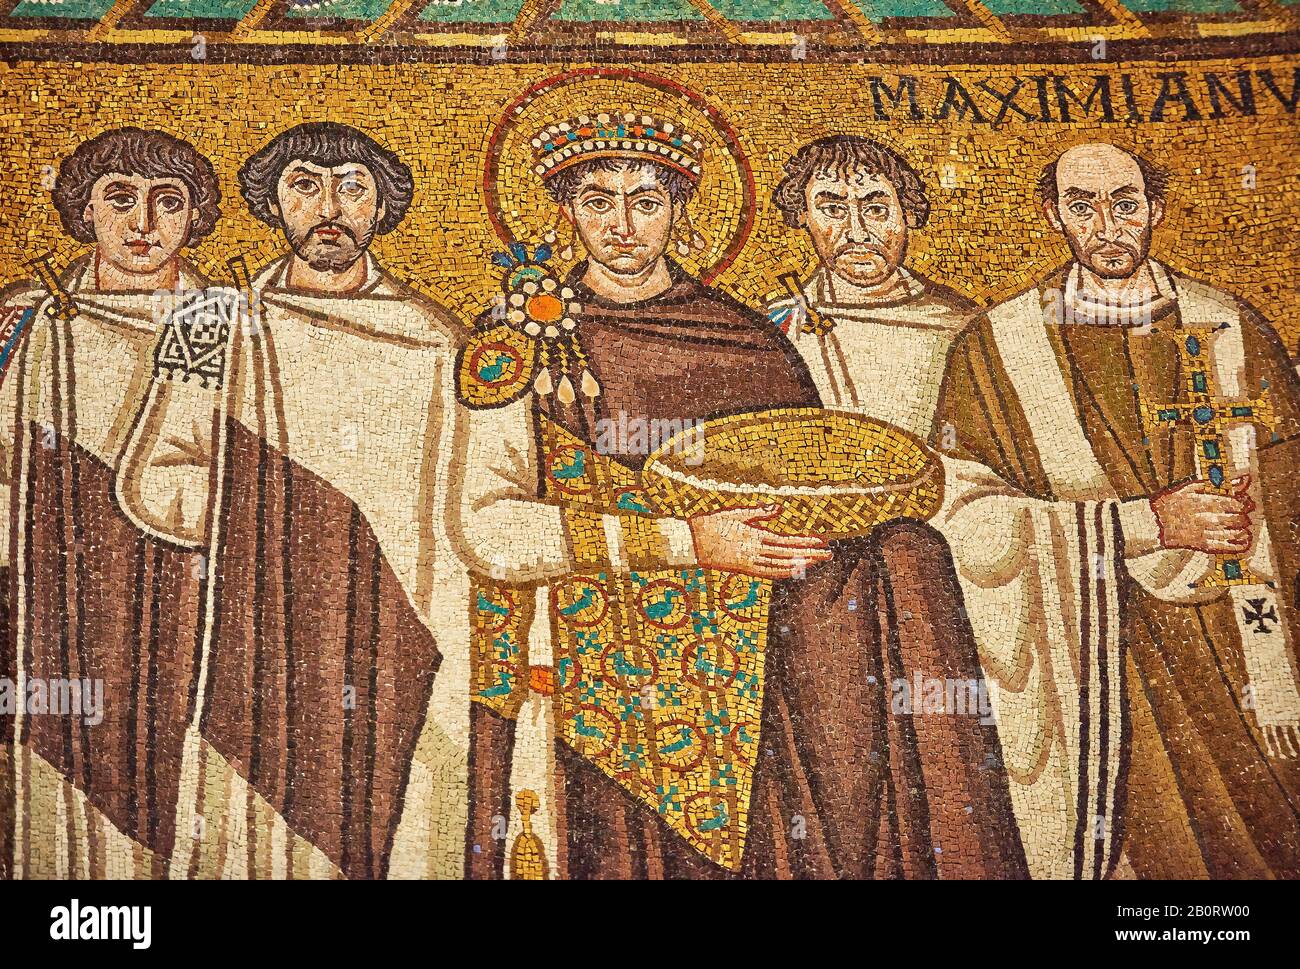 Mosaic depicting Emperor Justinian I. Byzantine Roman mosaics of the Basilica of San Vitale in Ravenna, Italy. Mosaic decoration paid for by Emperor J Stock Photo